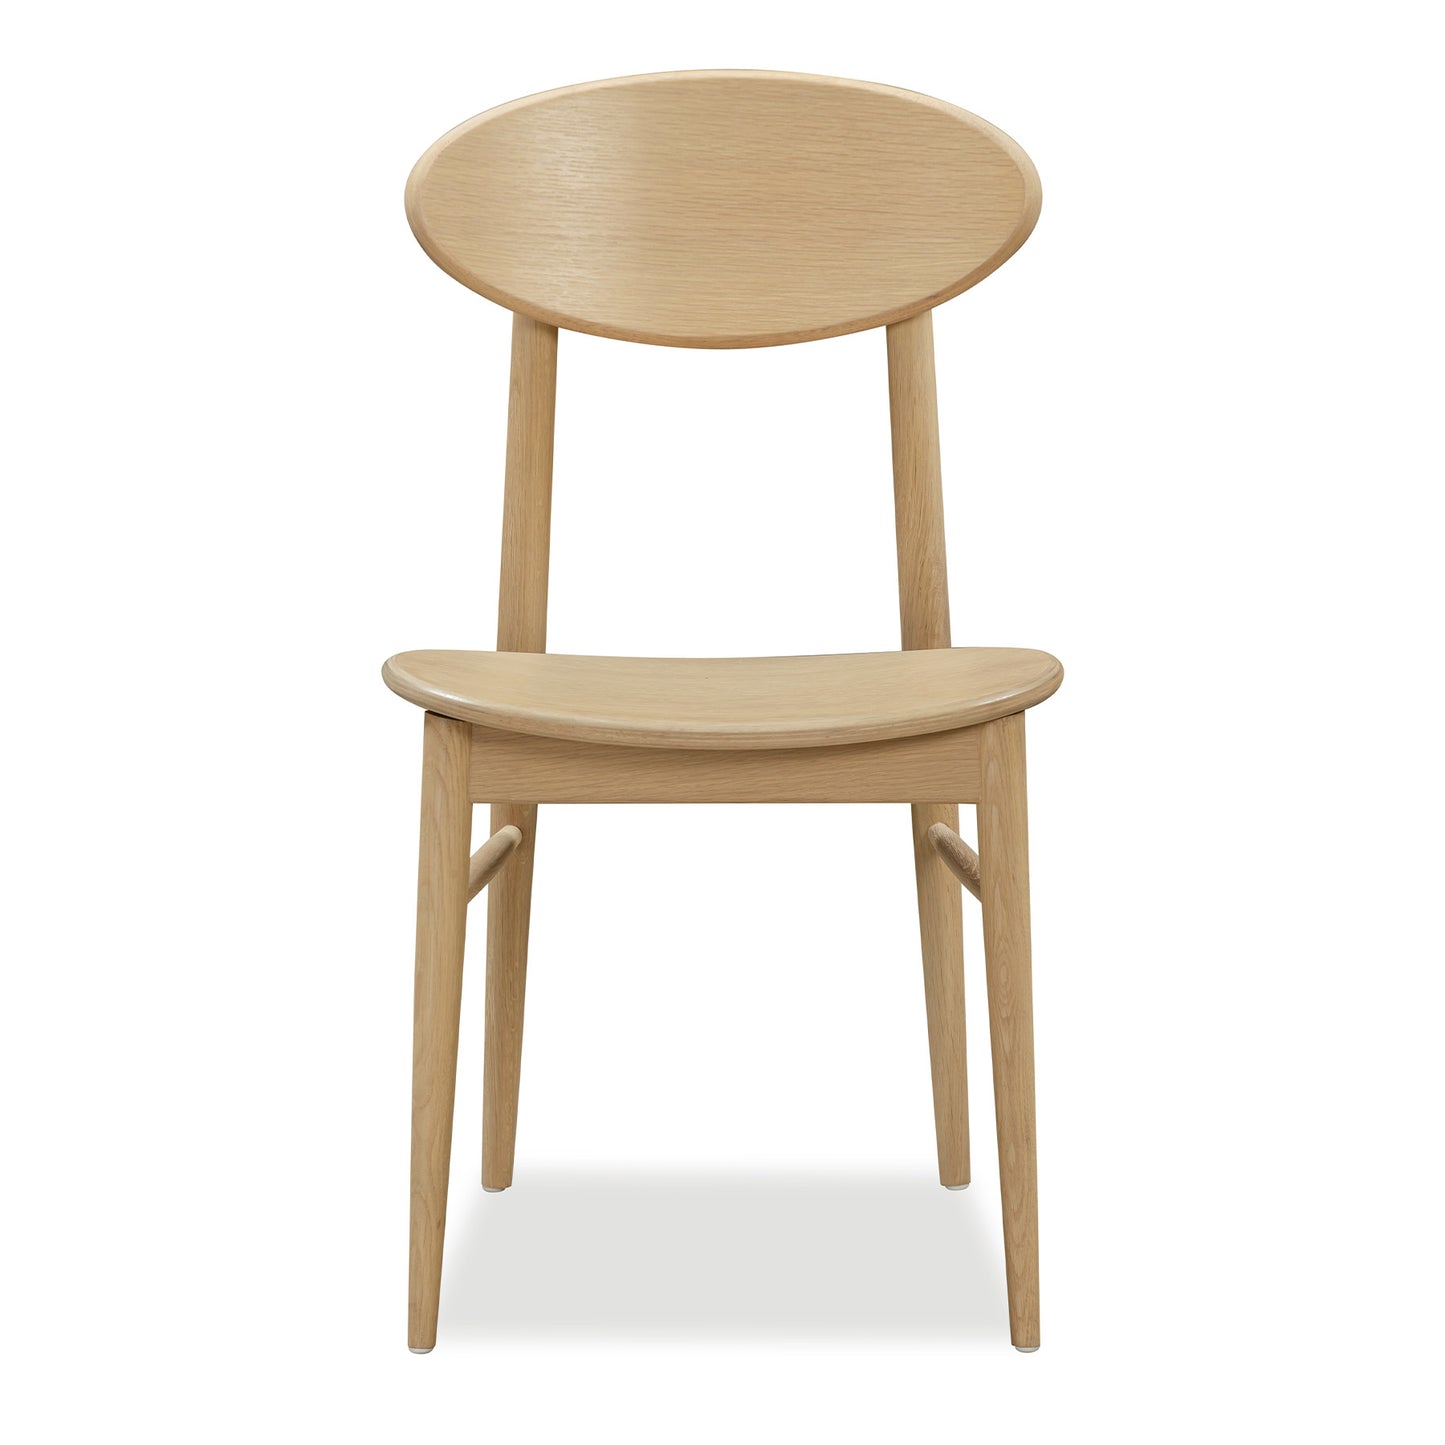 Icon Dining Chair - Oak